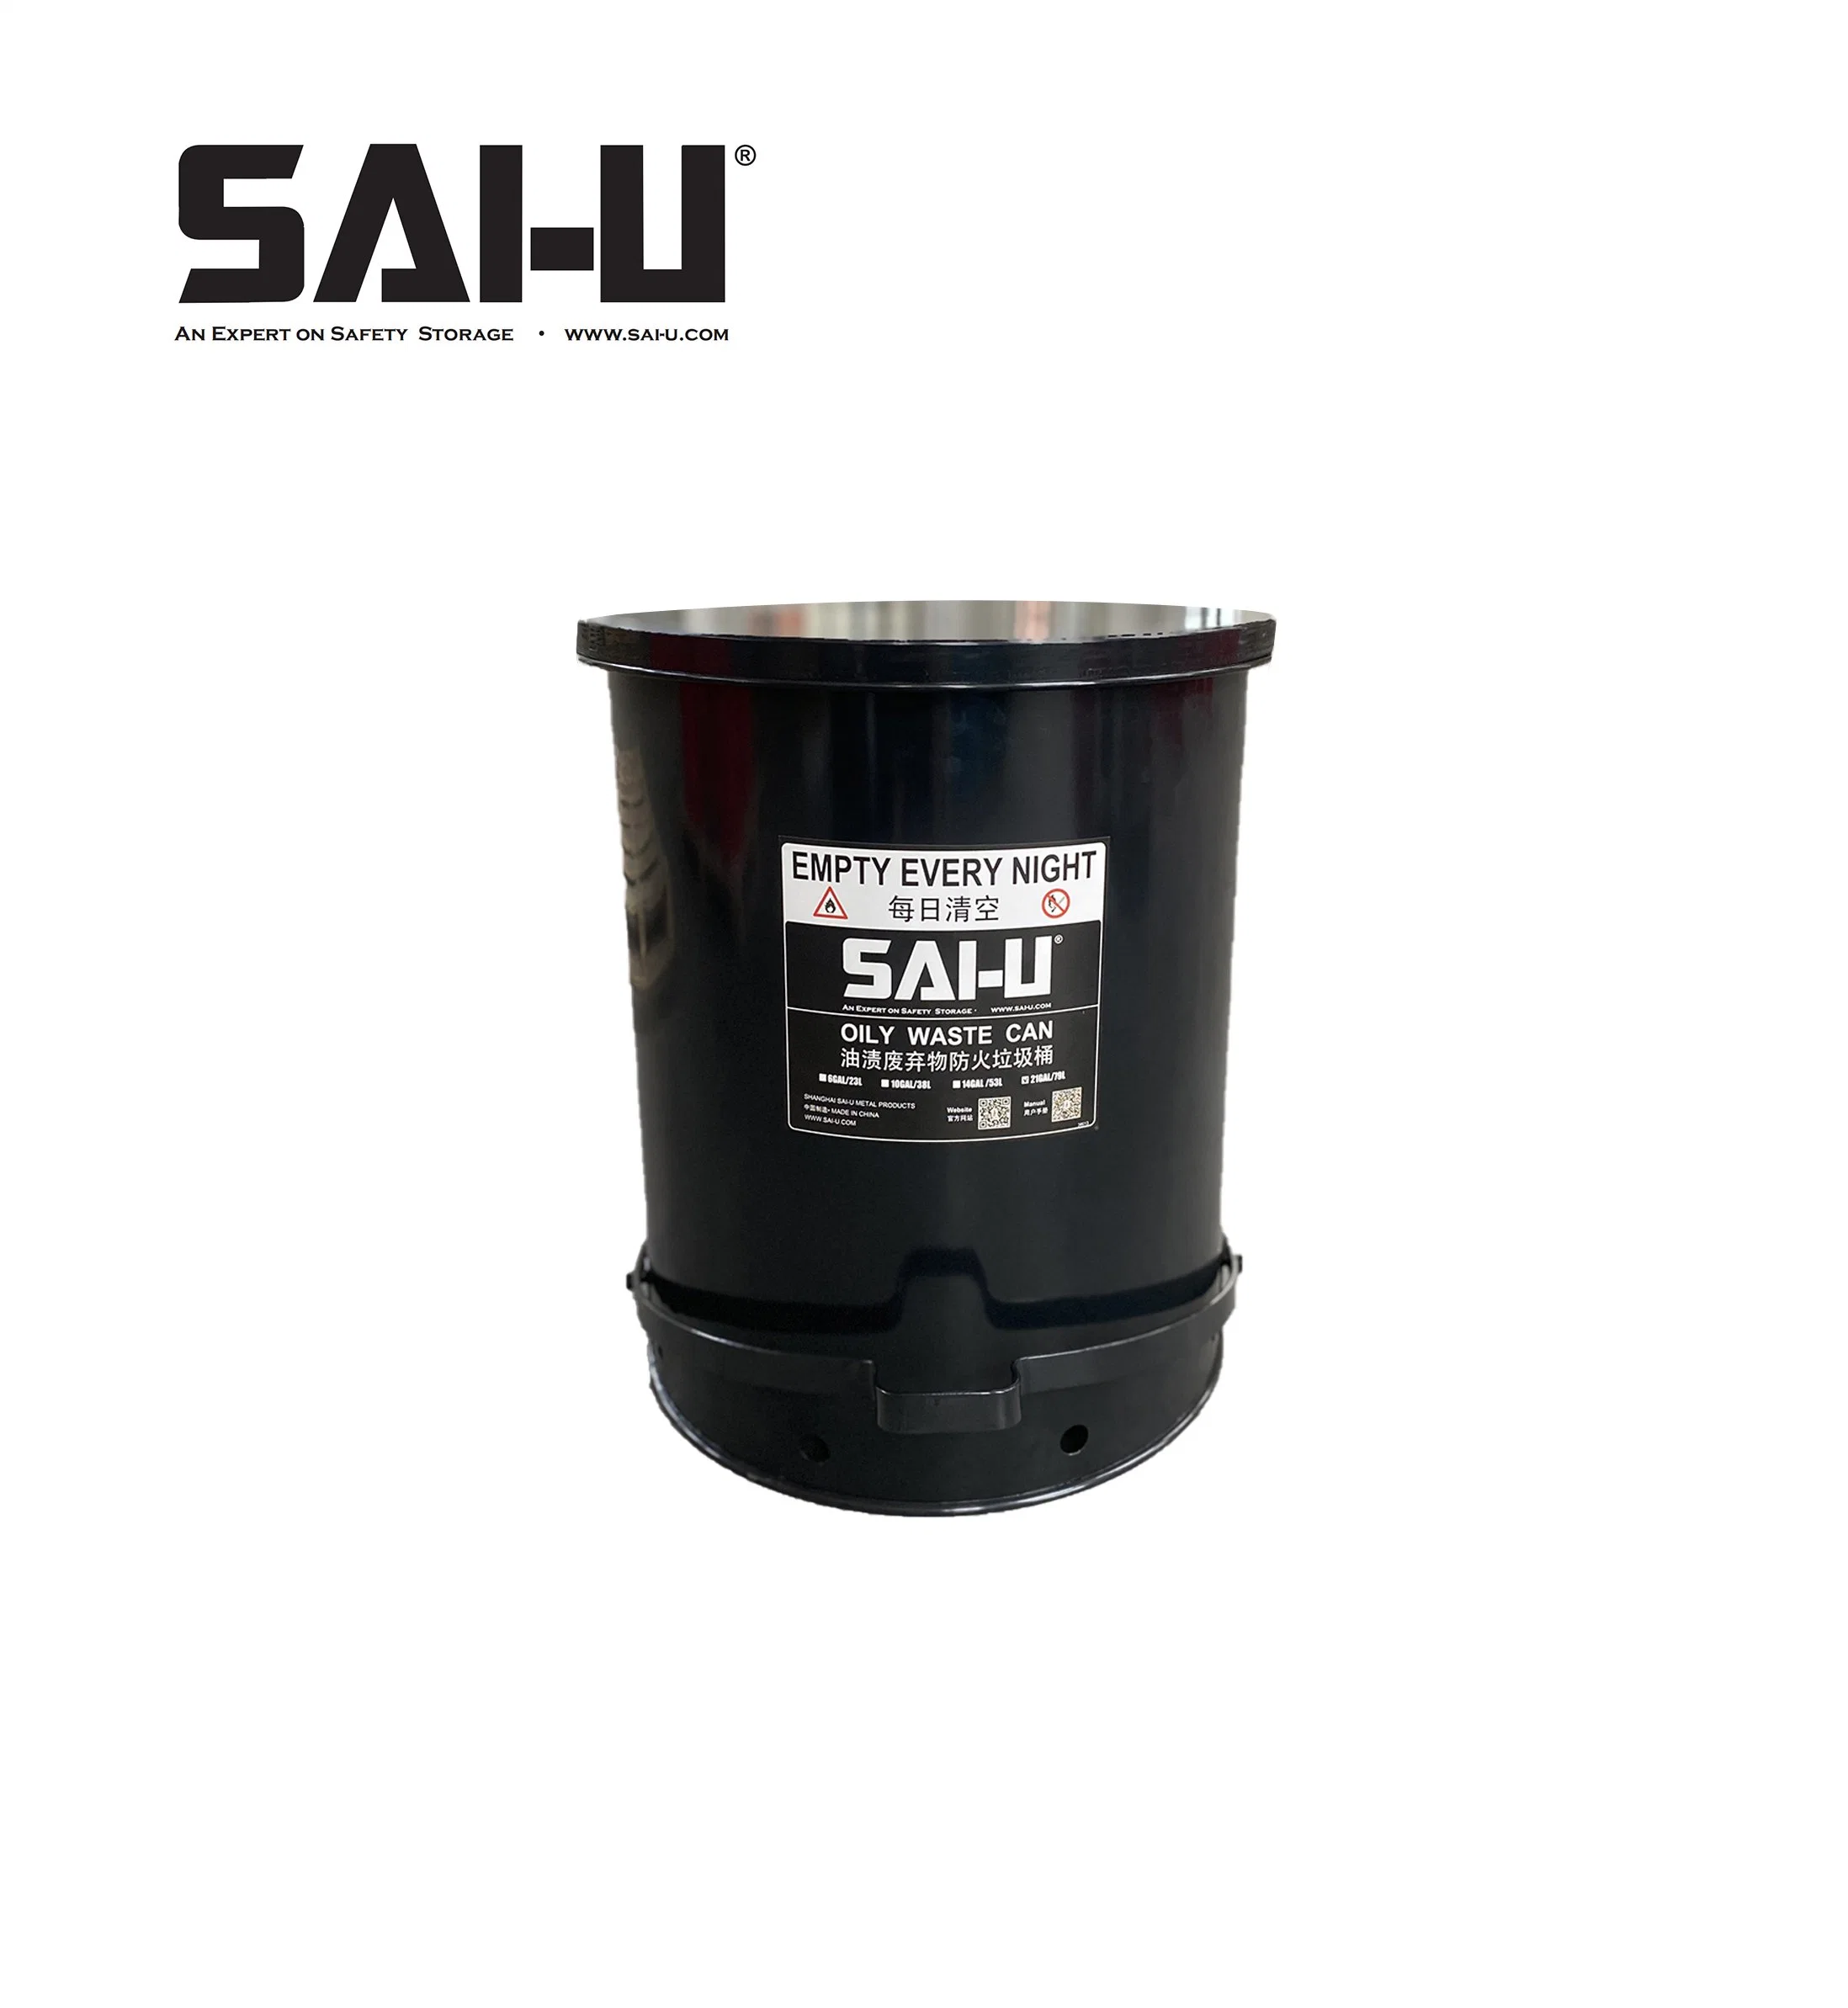 Factory Custom 10 Gal/ 37.8L Oily Waste Can for Oil Trashes, Collect Oily Trashes